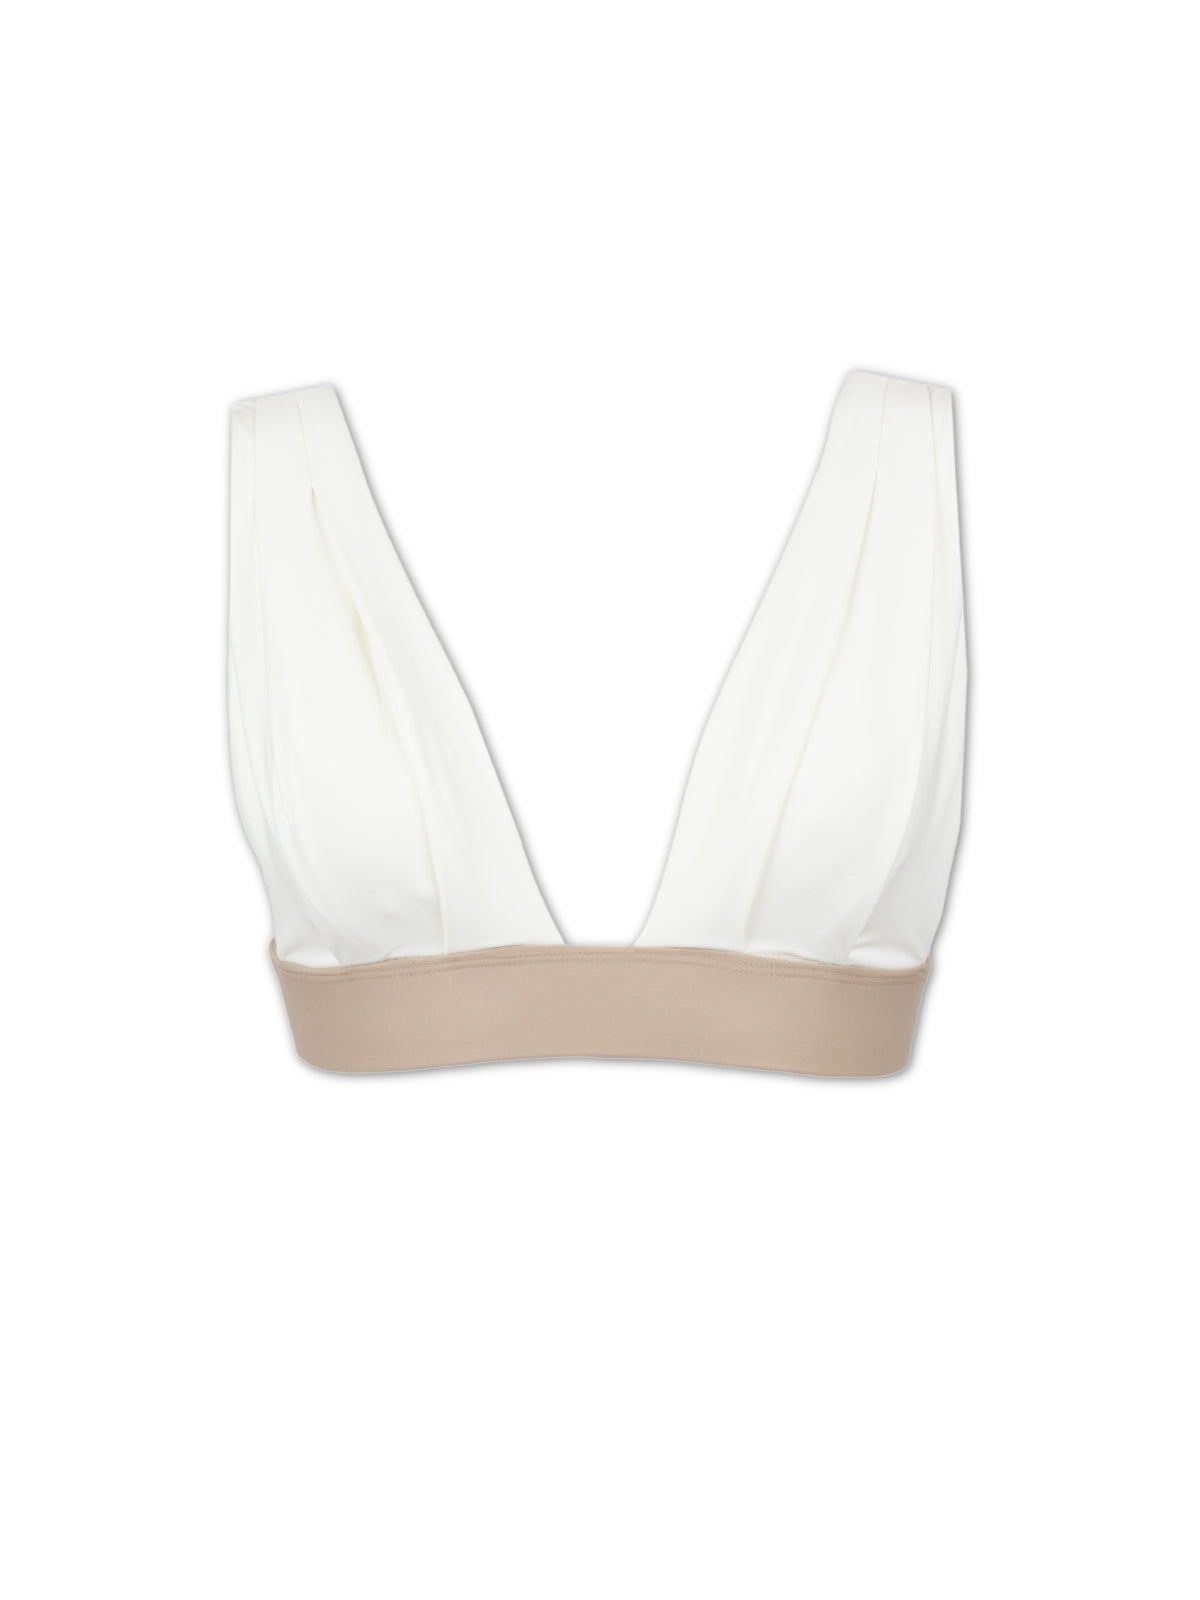 COLETTE TOP - Ivory / Sand